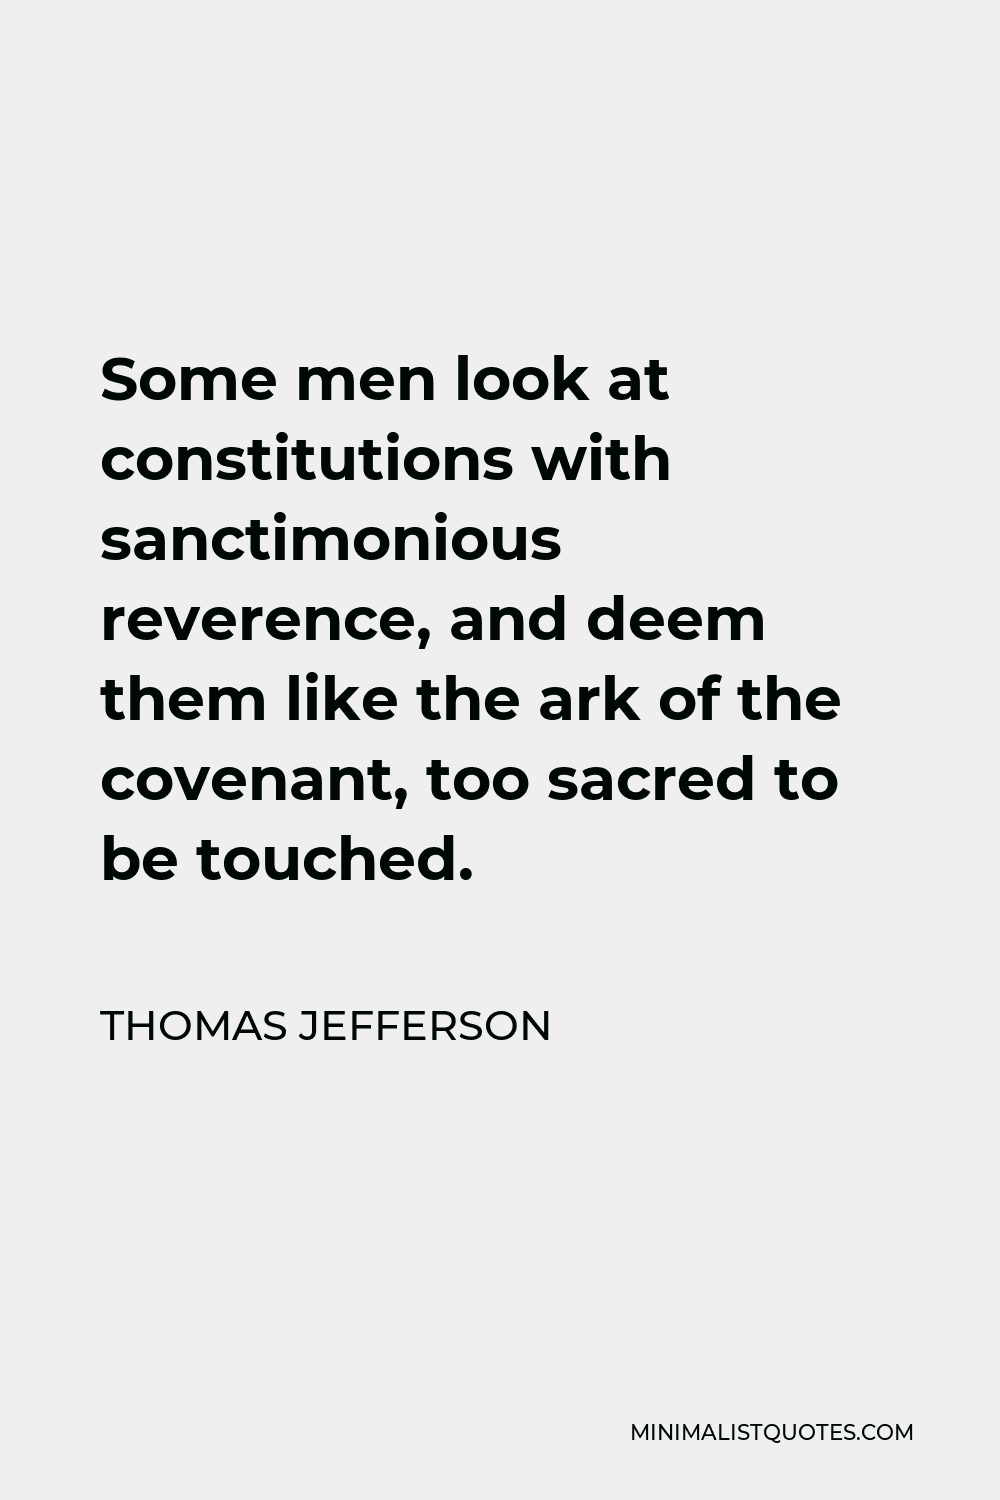 Thomas Jefferson Quote - Some men look at constitutions with sanctimonious reverence, and deem them like the ark of the covenant, too sacred to be touched.